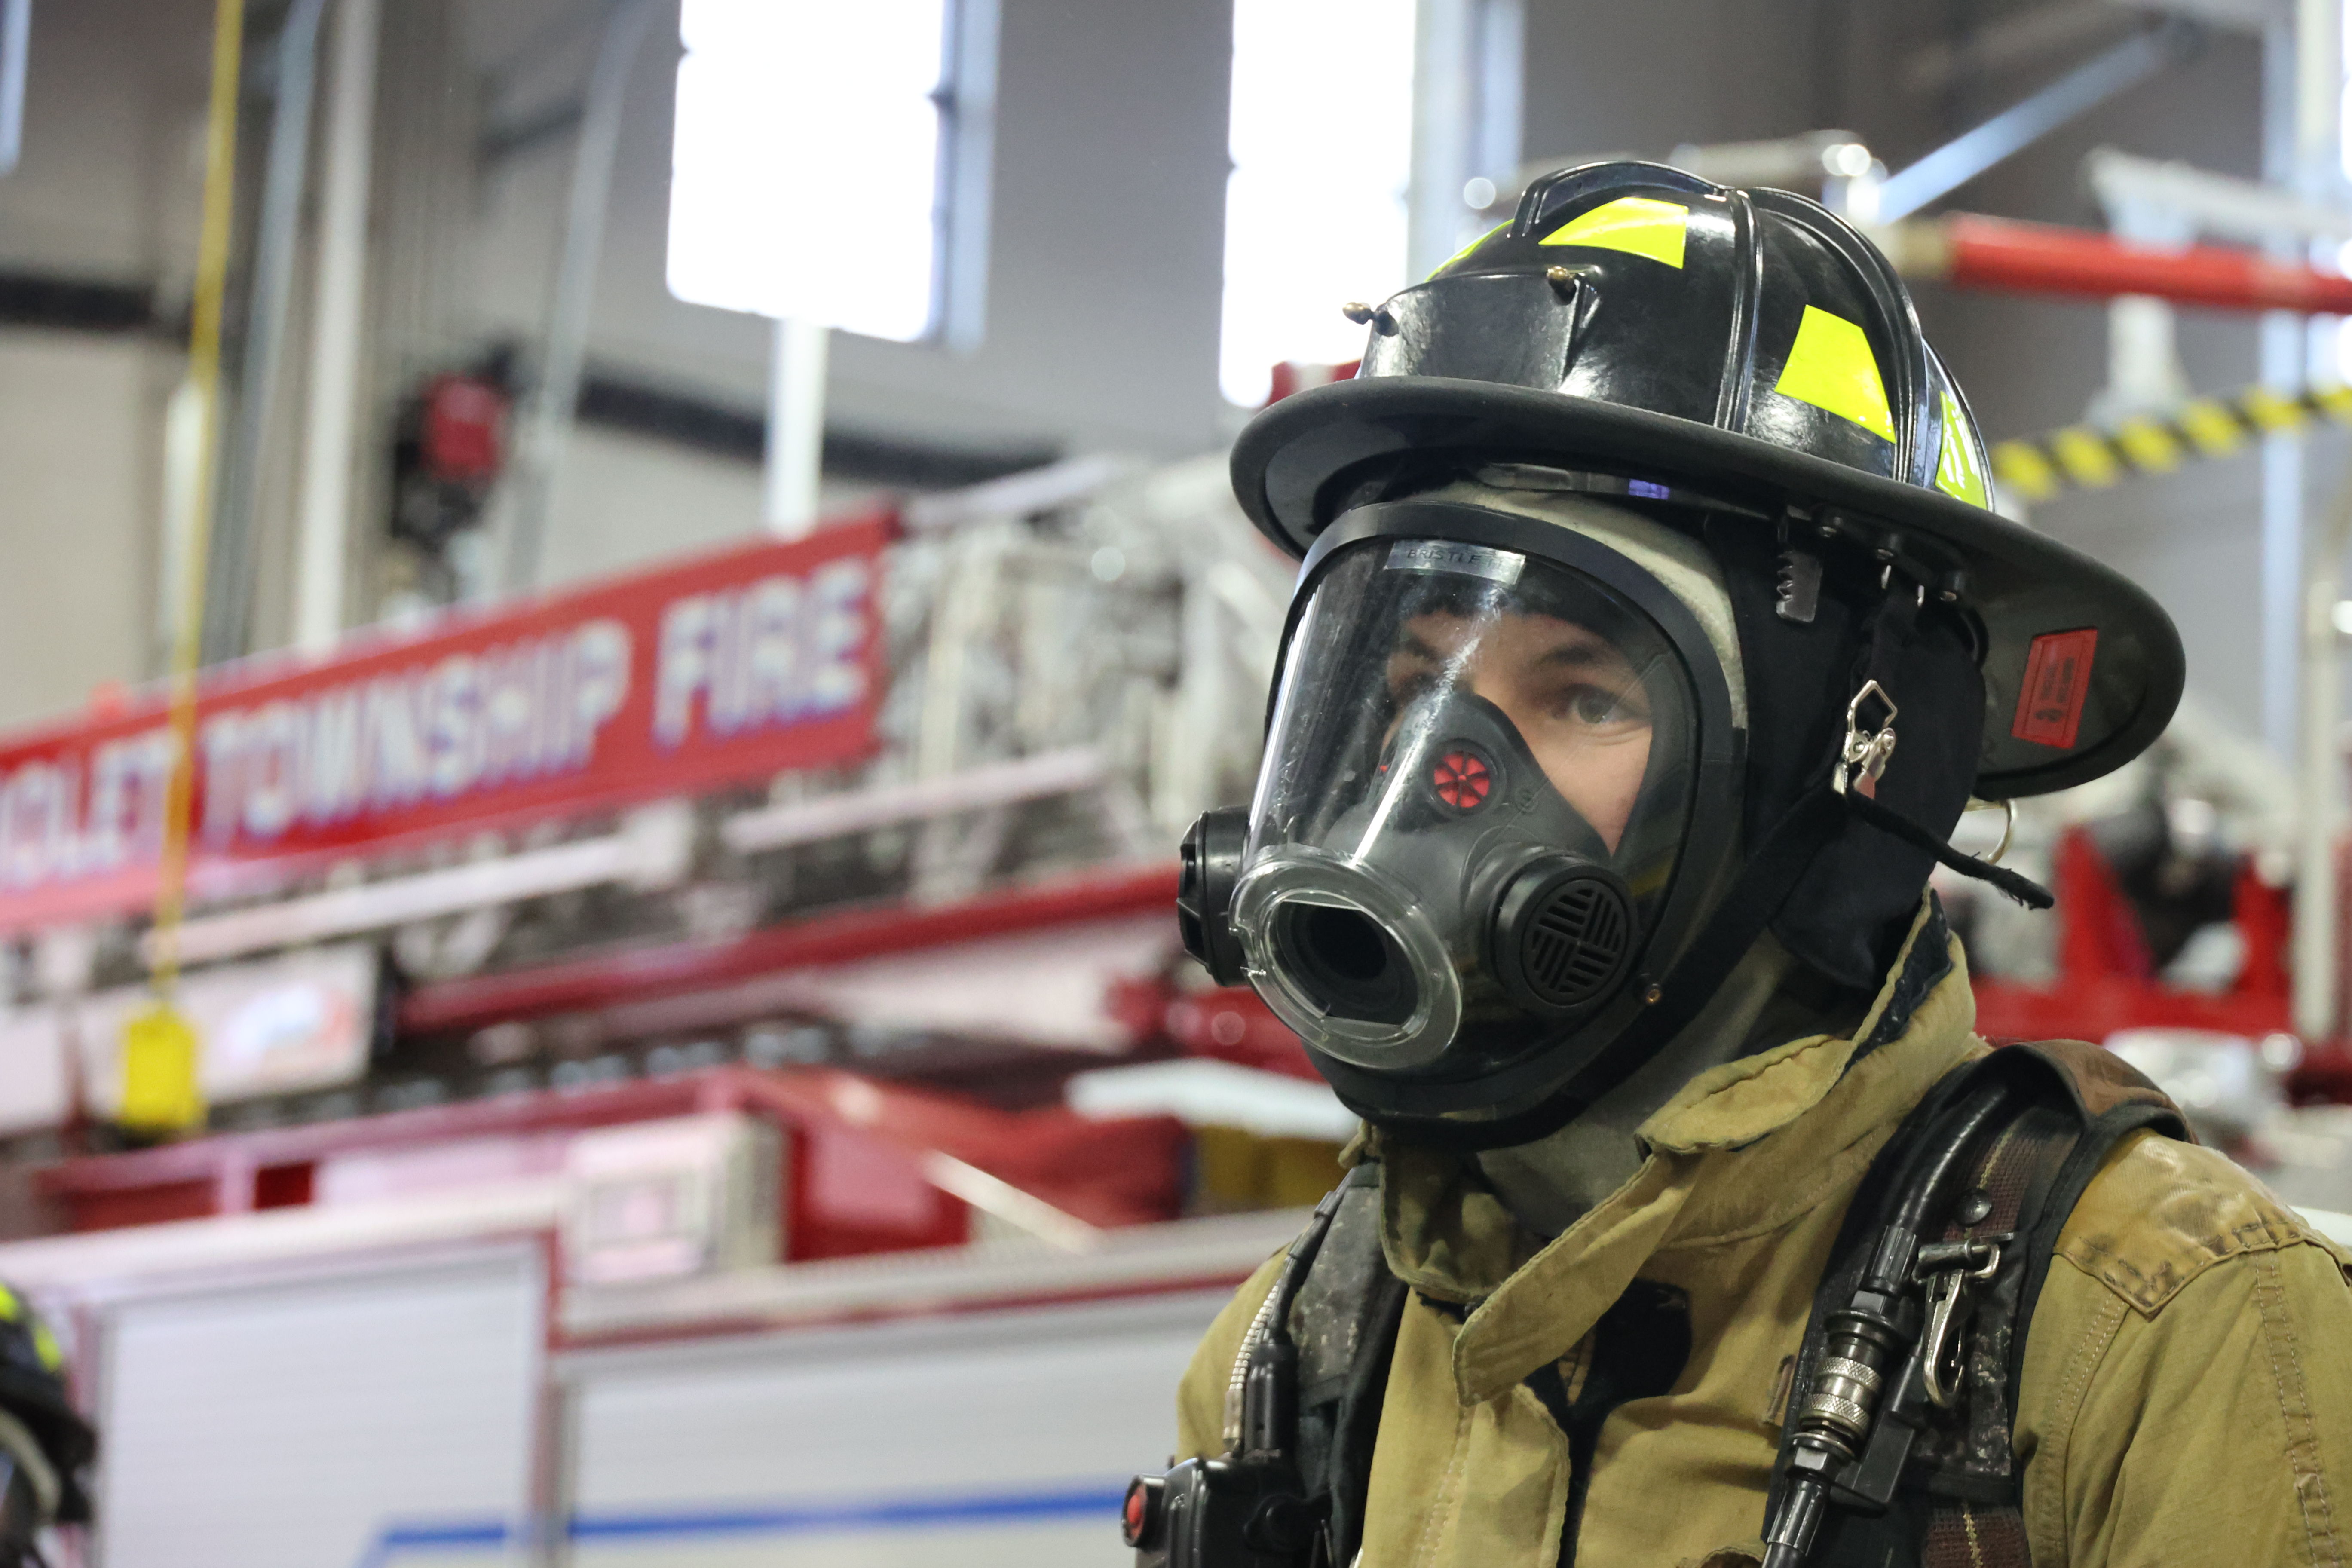 A Firefighting student stands outside of an EMS vehicle in full turnout gear.